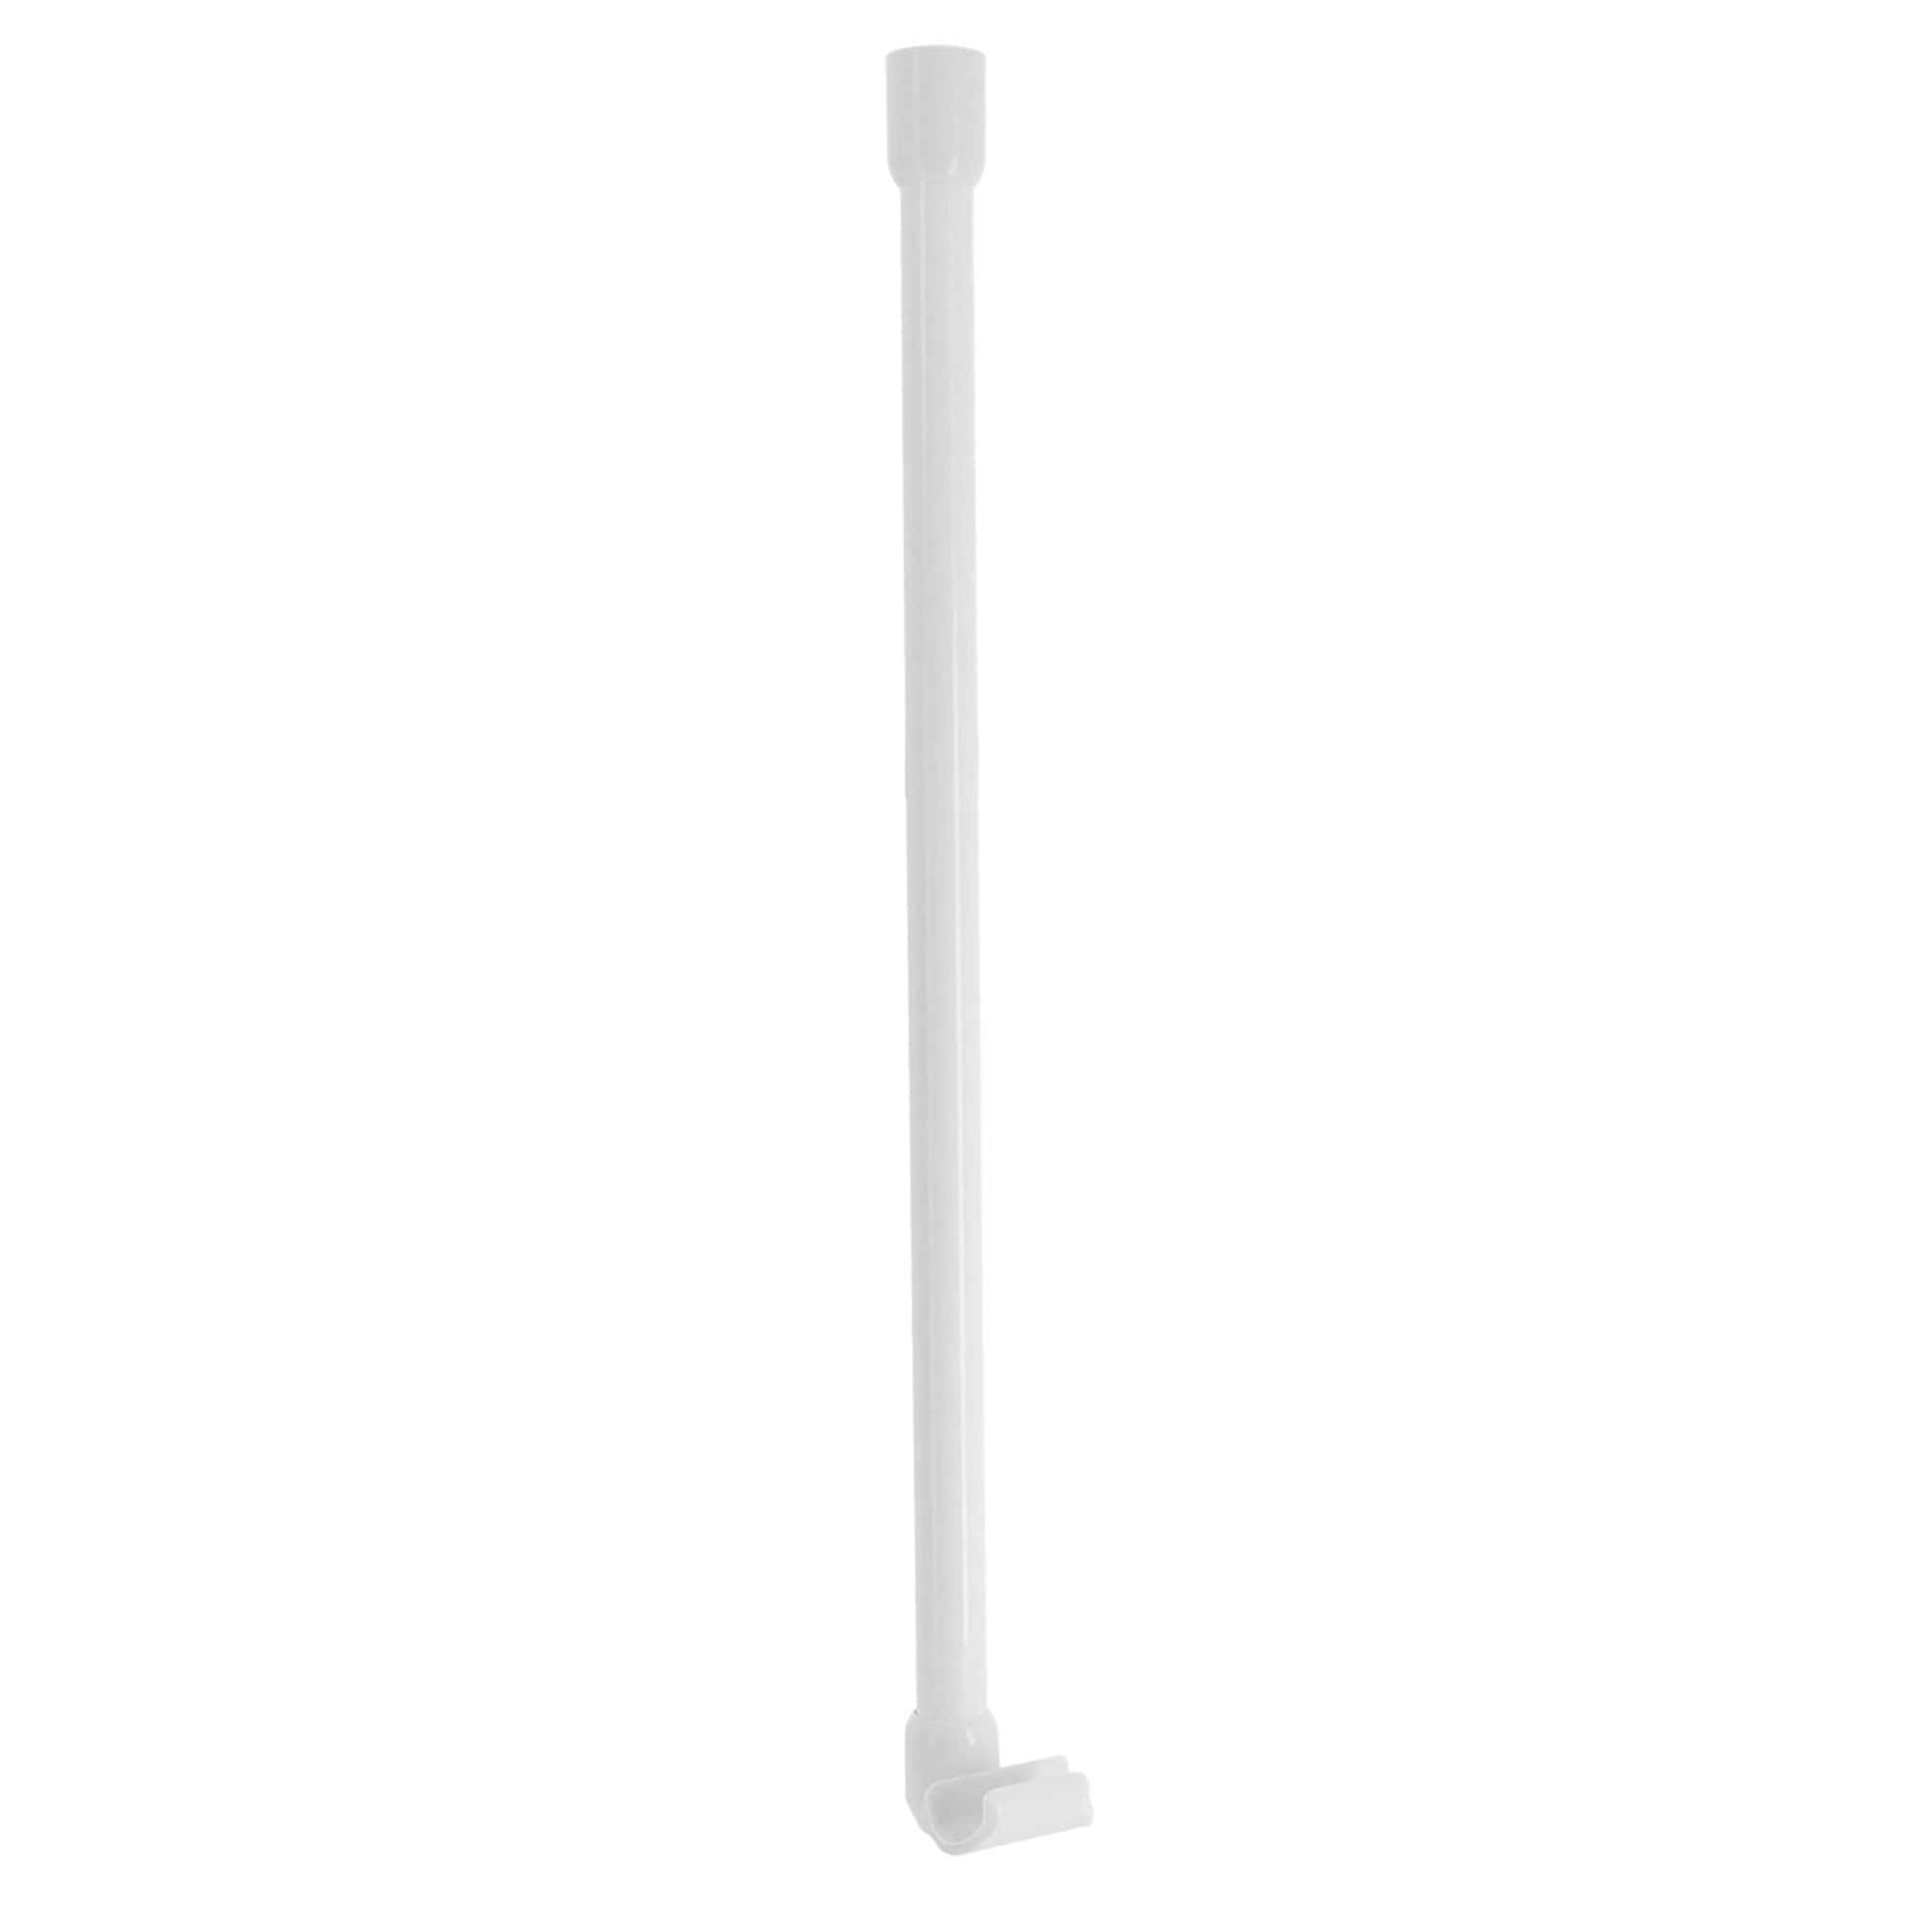 White adjustable ceiling support rod for shower curtain rail, minimalist design